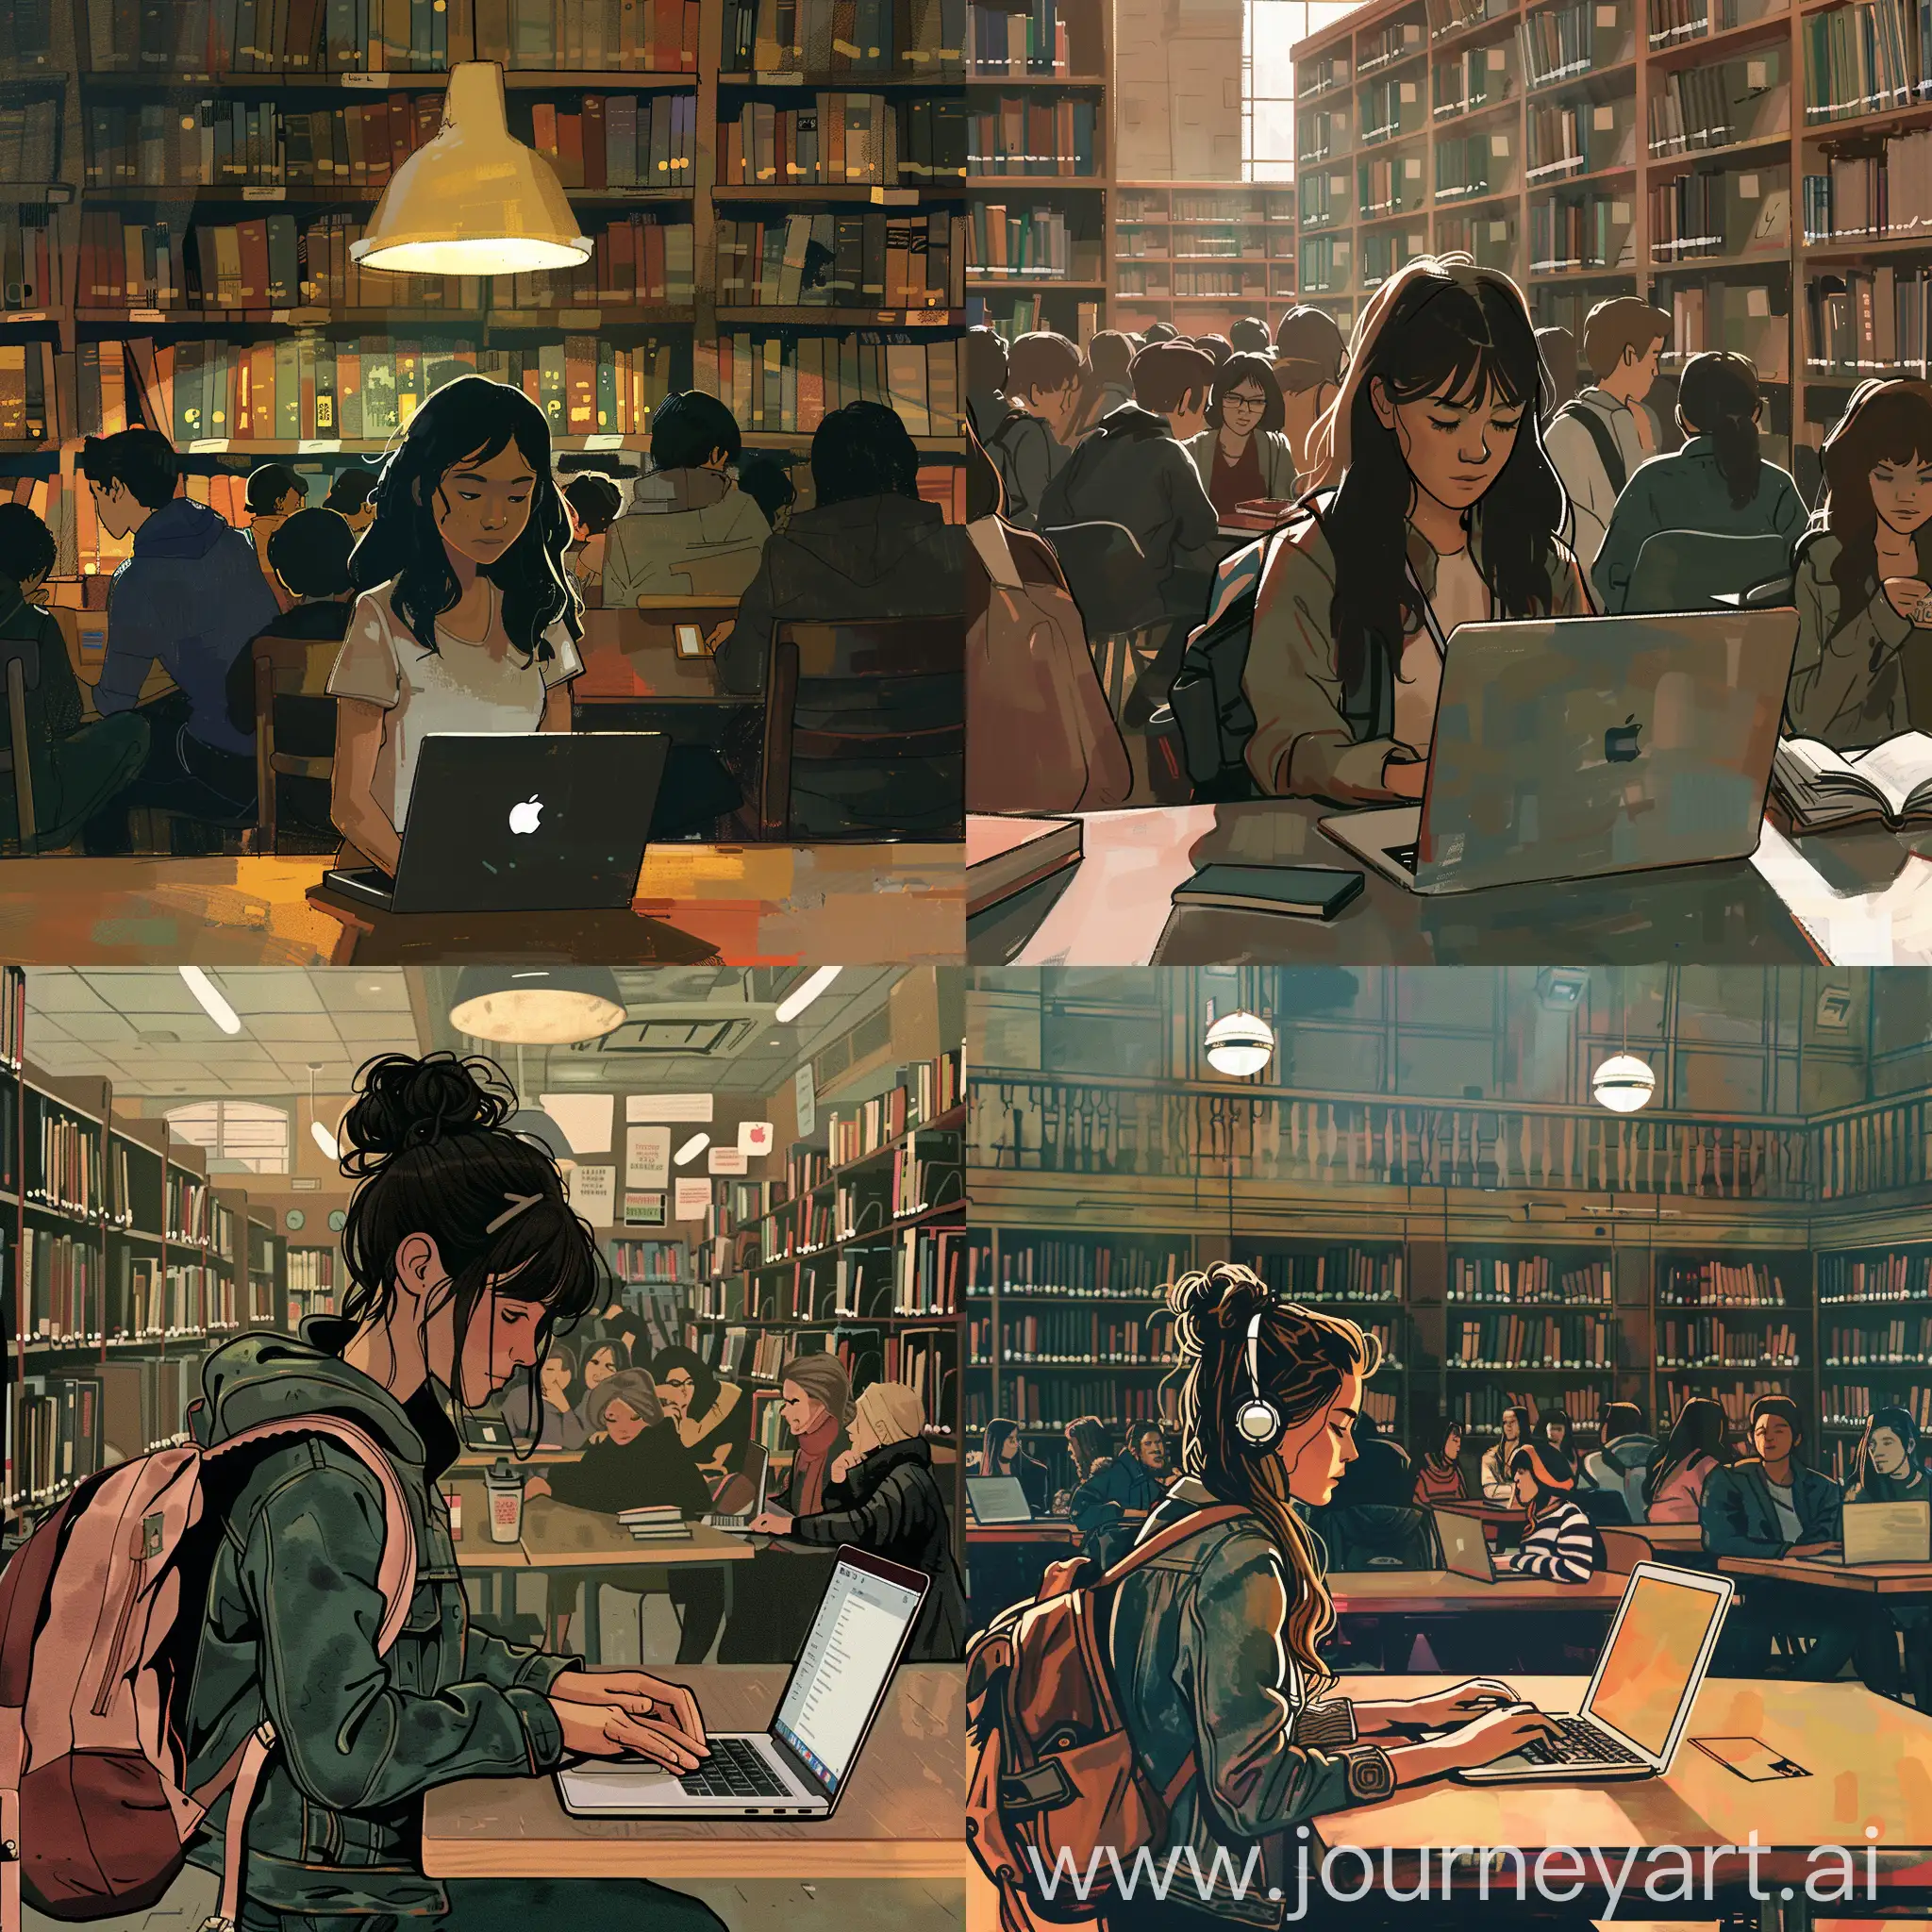 Girl-Studying-with-Laptop-in-Busy-Library